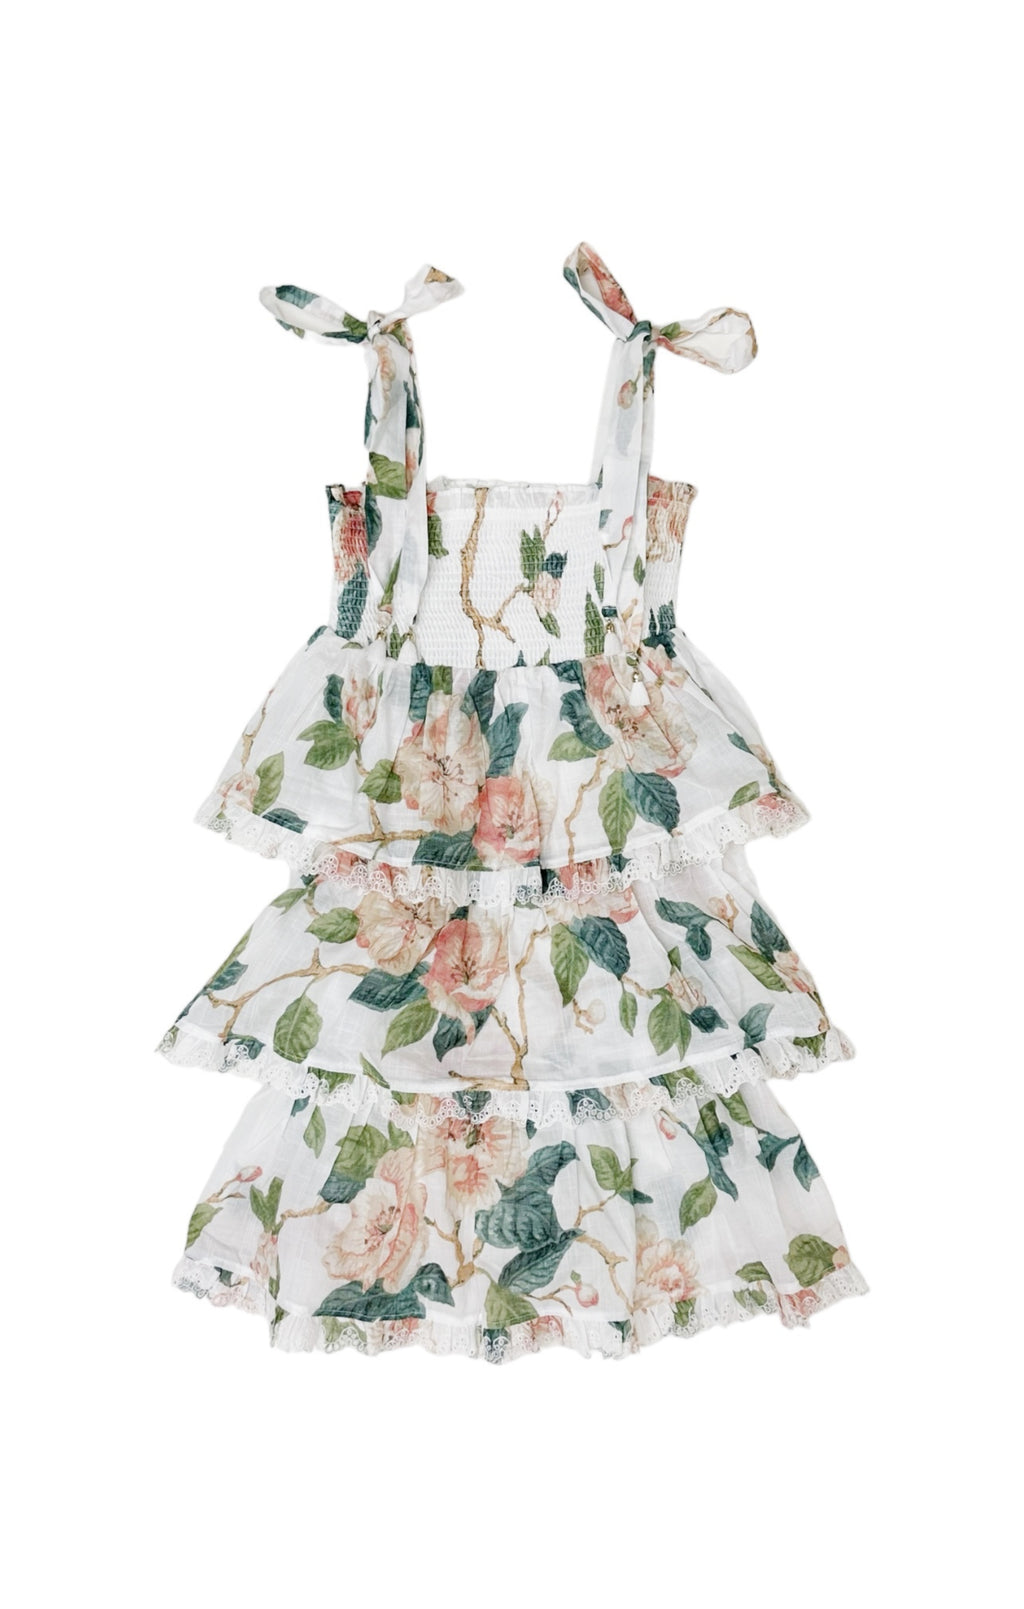 ZIMMERMANN (NEW) with tags Dress Size: 4 Years